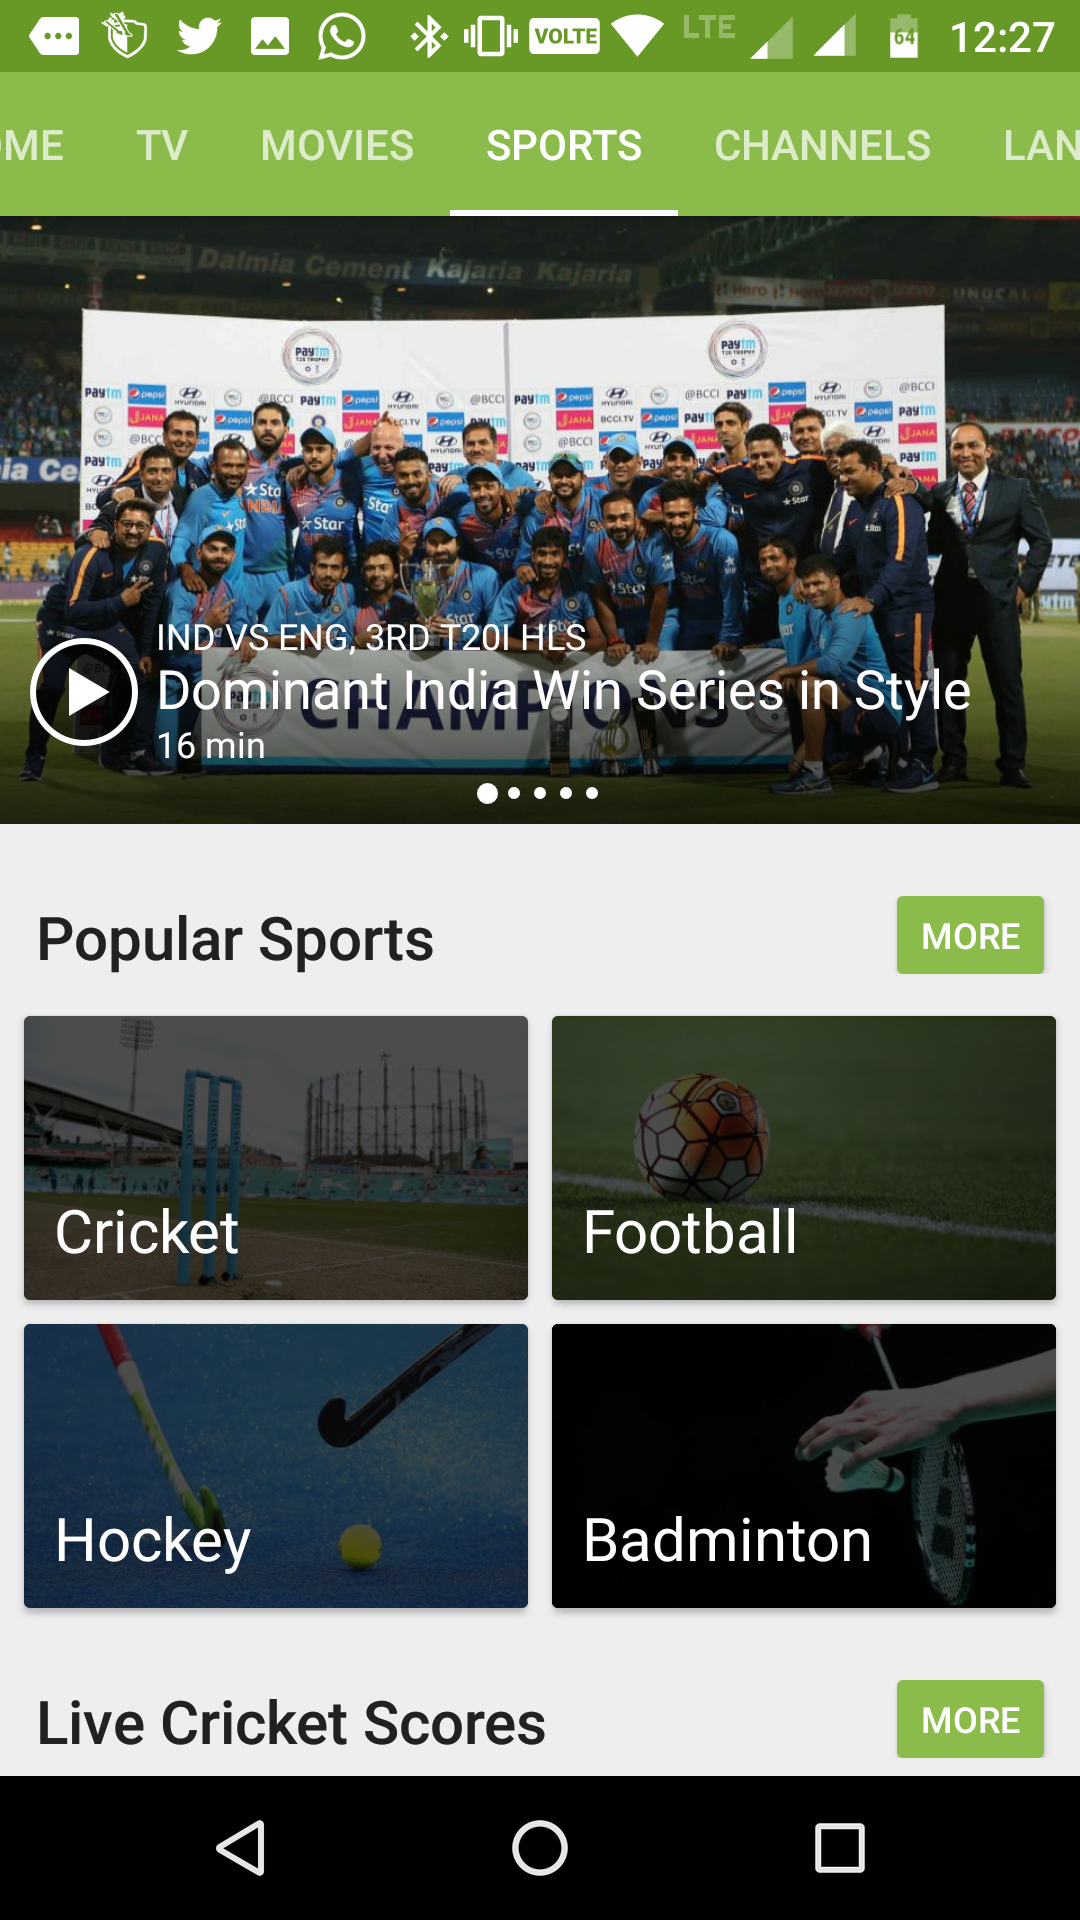 hotstar app download for android in pakistan